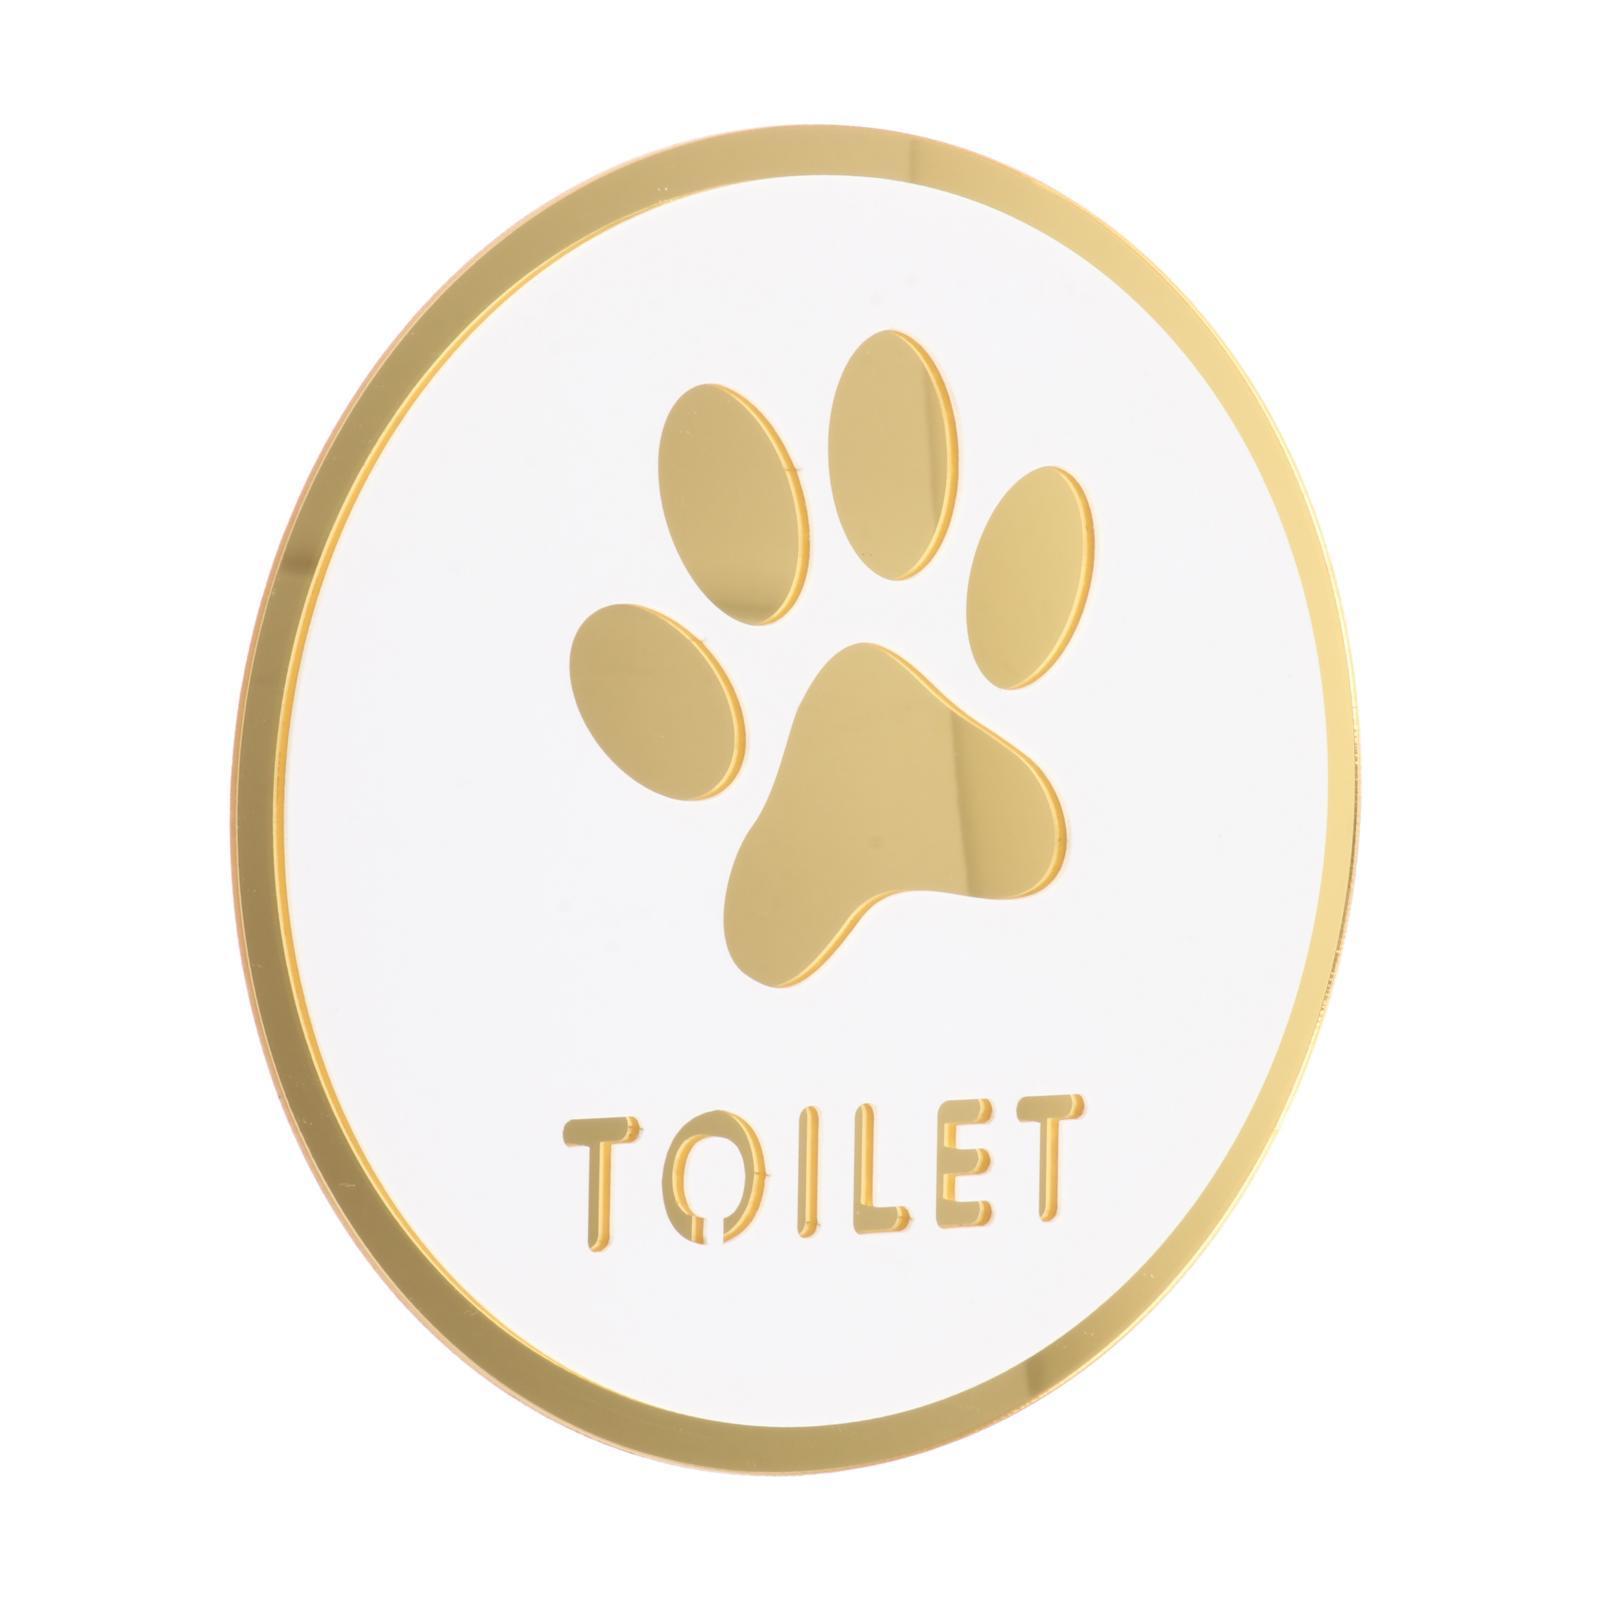 Toilet Sign Toilet Symbol Sticker Plaque Wall Decor Acrylic Bathroom Door Signage Restroom Sign for Public Place Commercial Office Home Shop